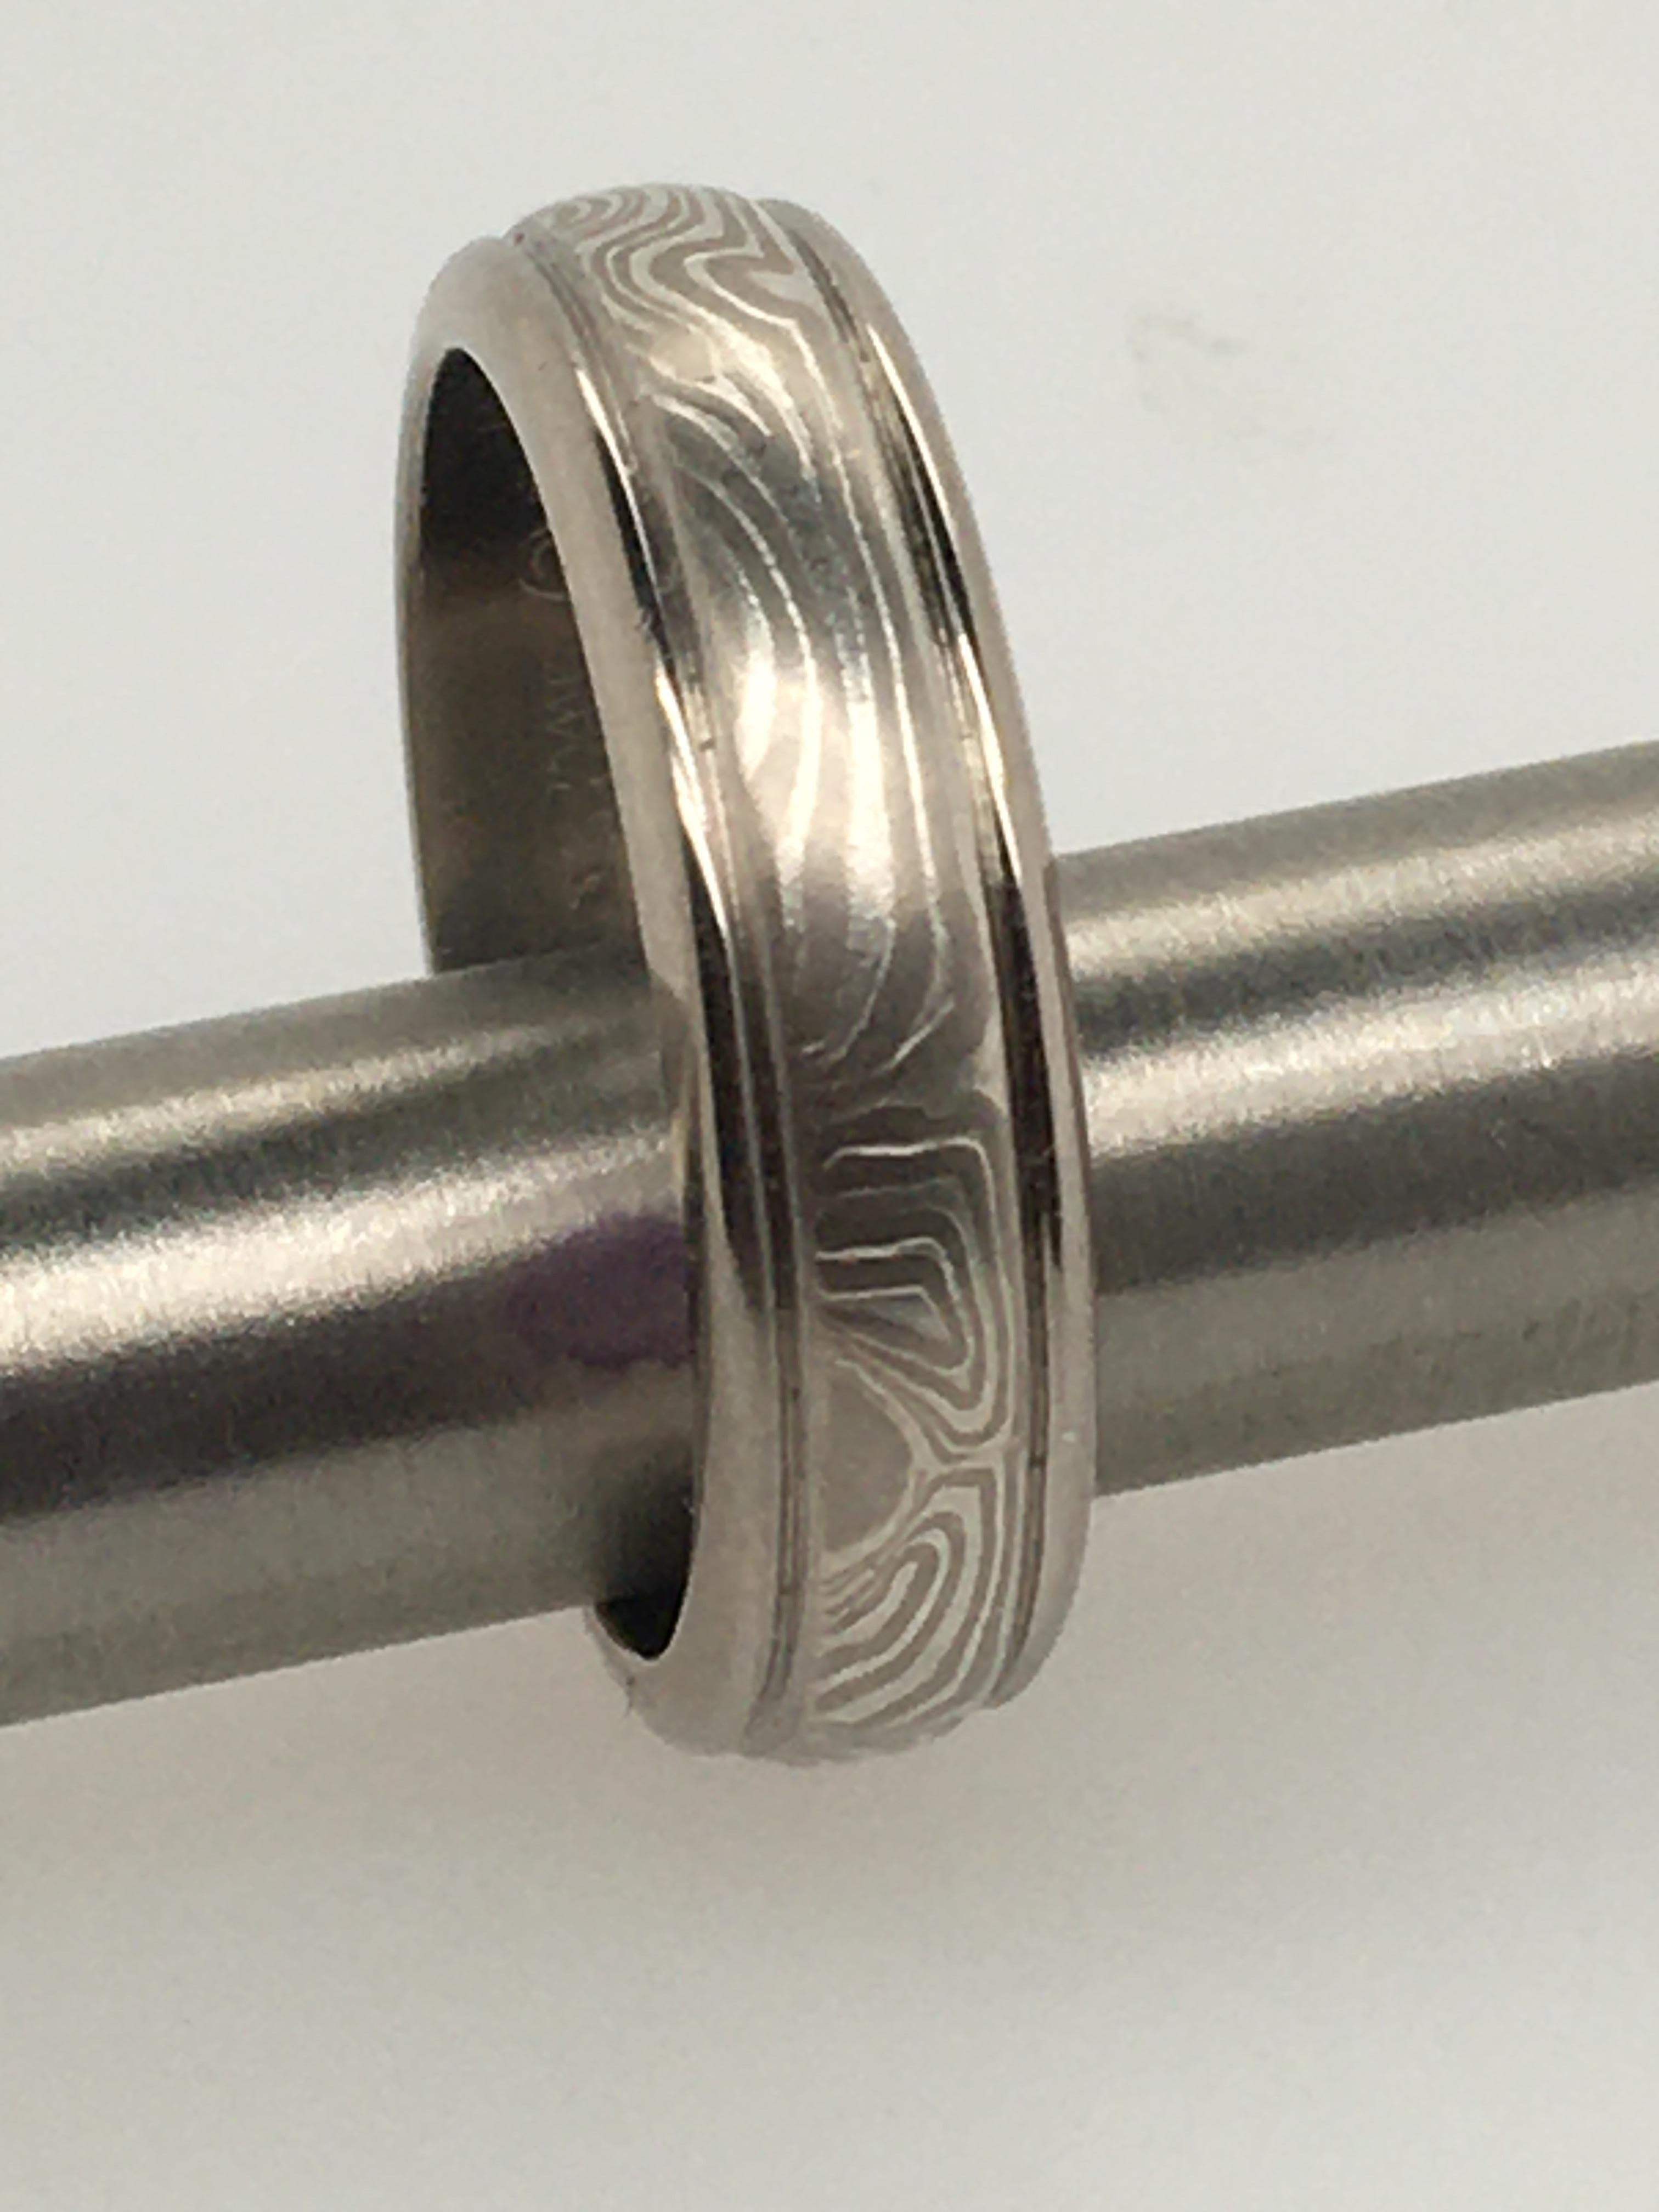 This handsome handcrafted George Sawyer 6 mm Mokume round-edged band features 14K gray gold & etched sterling silver, surrounded by a 14K gray gold edge. The interior is stamped 